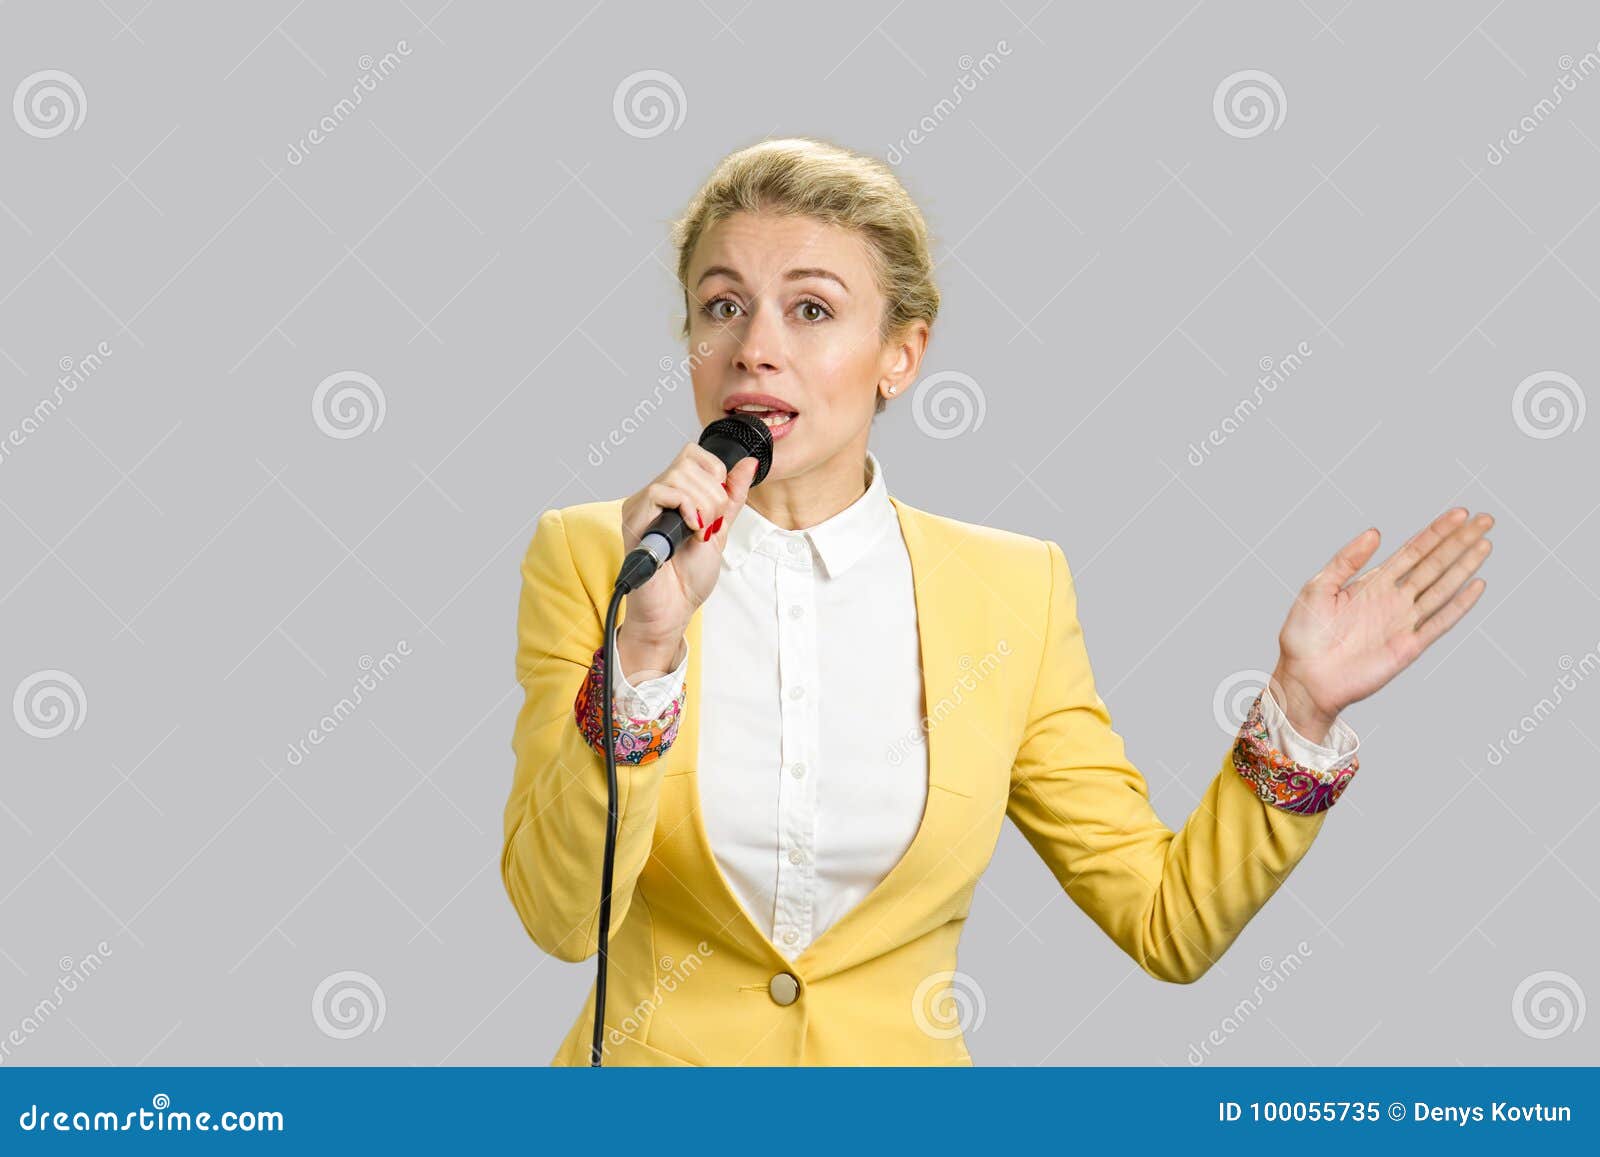 business woman speaking and gesticulating.